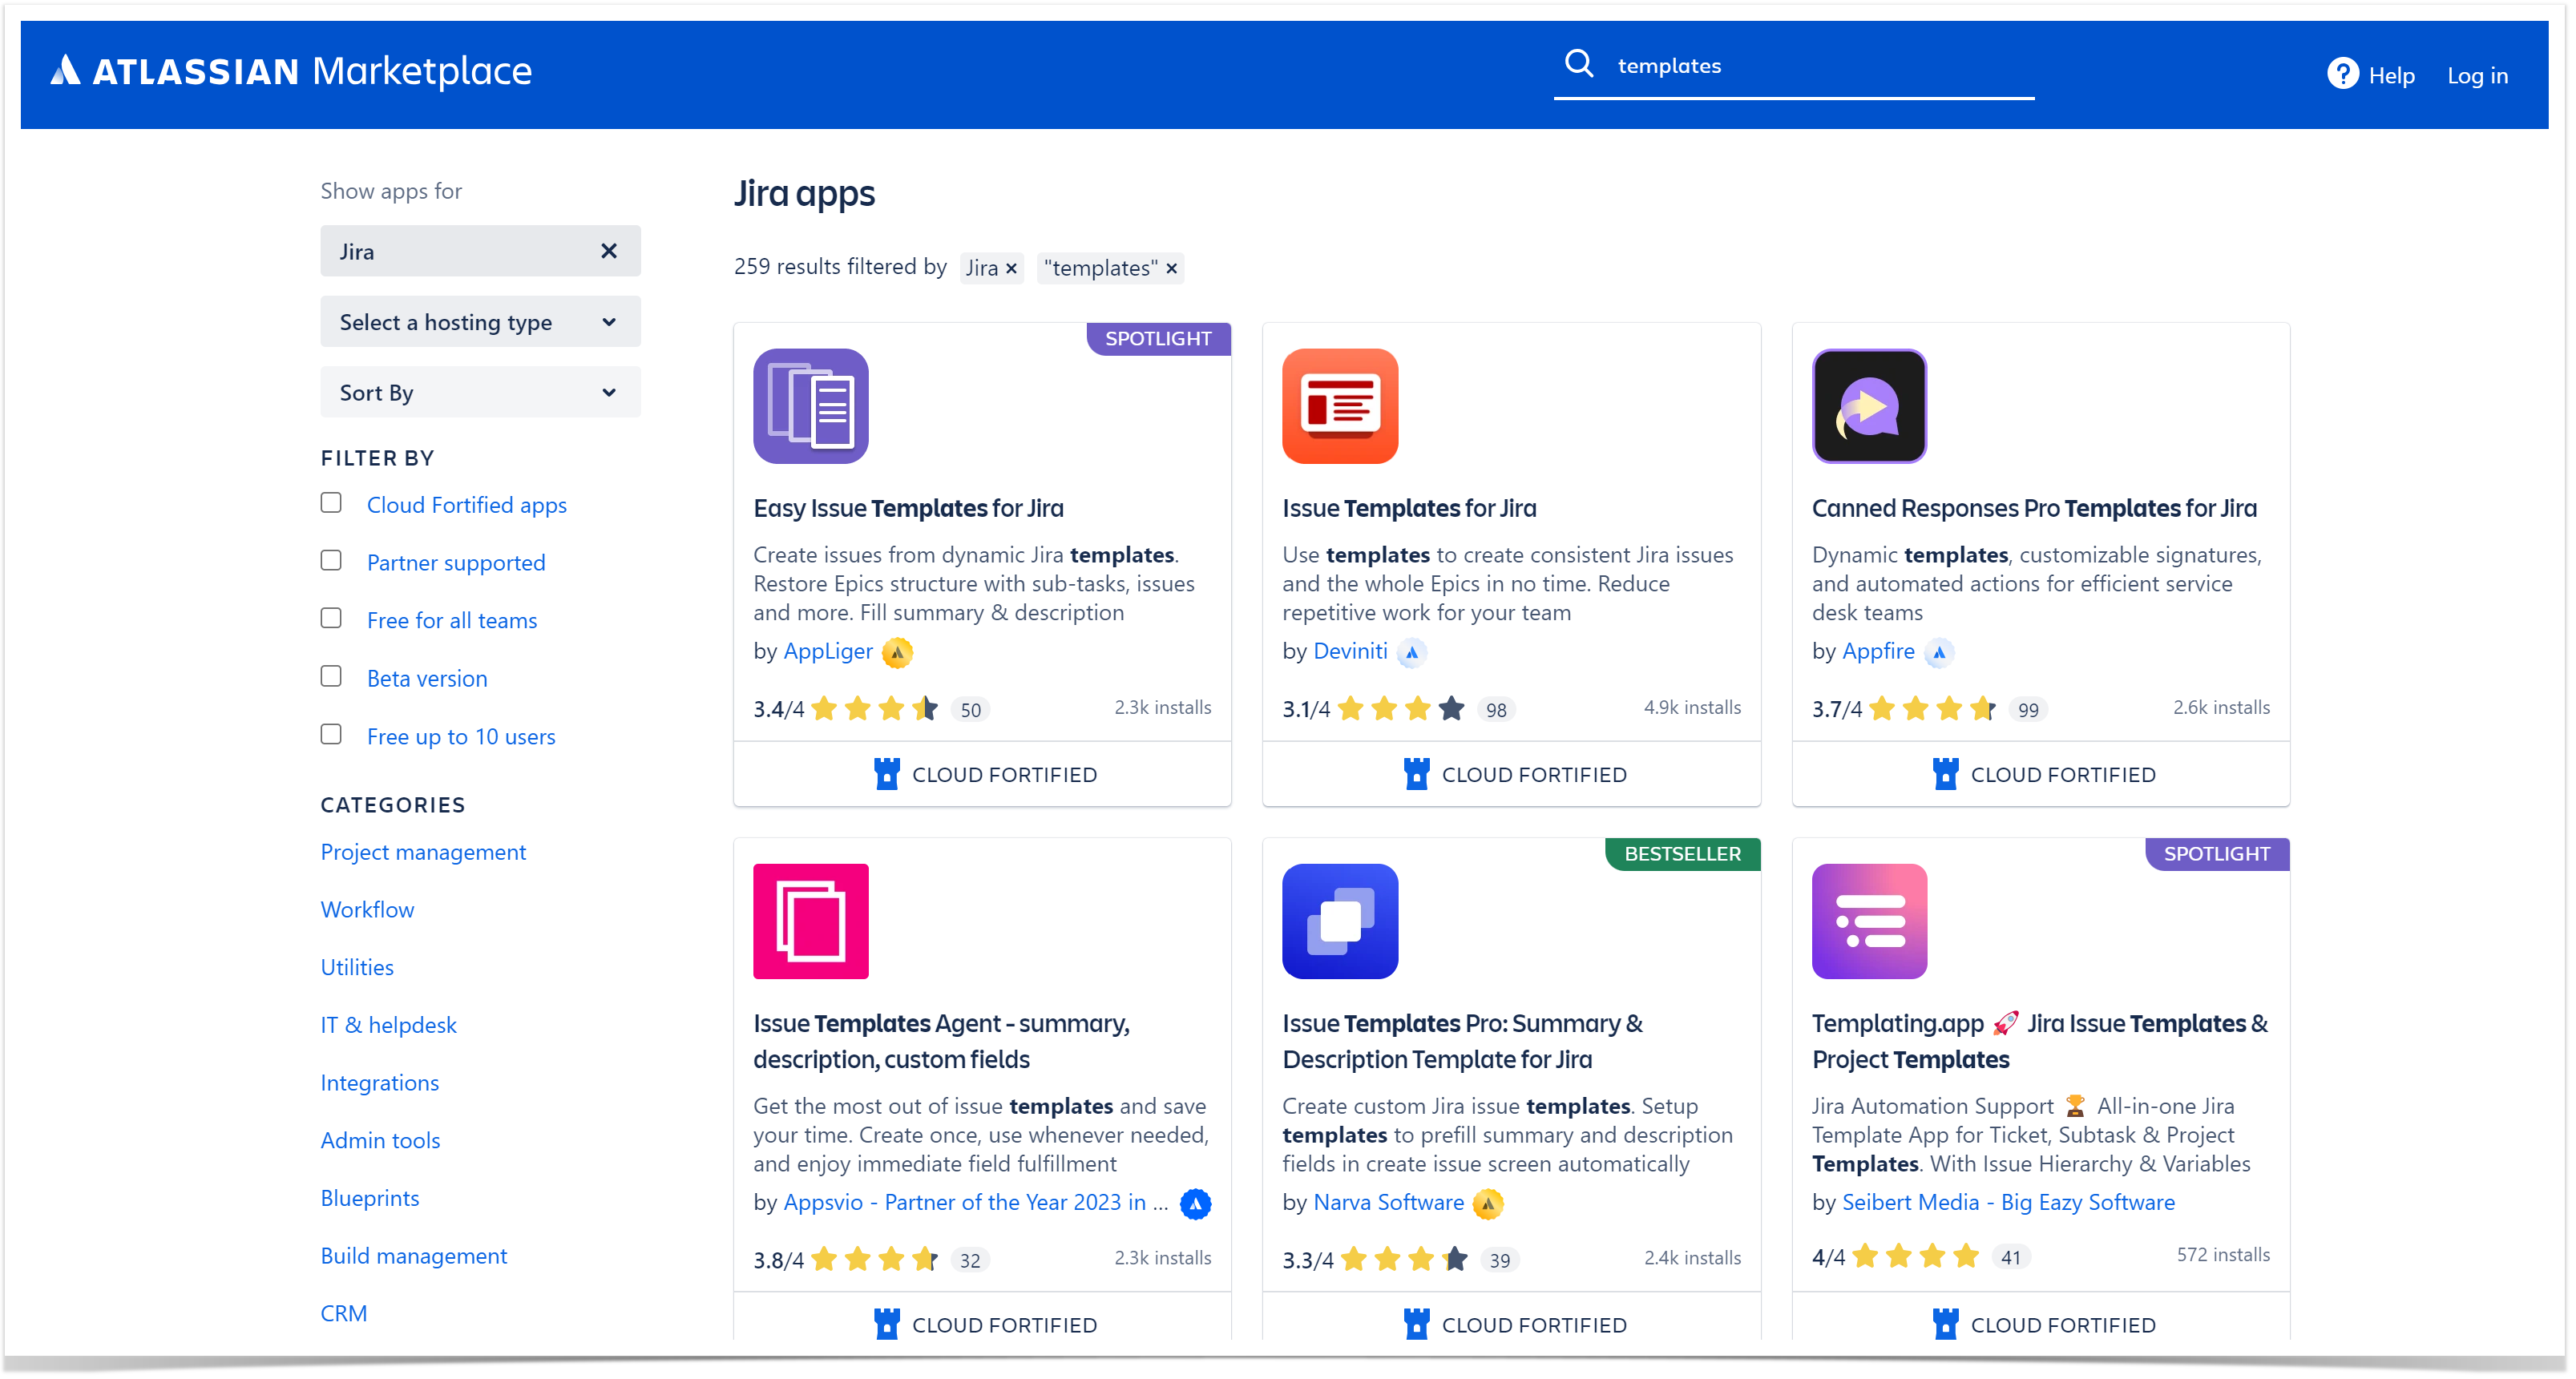 Apps of the Atlassian Marketplace